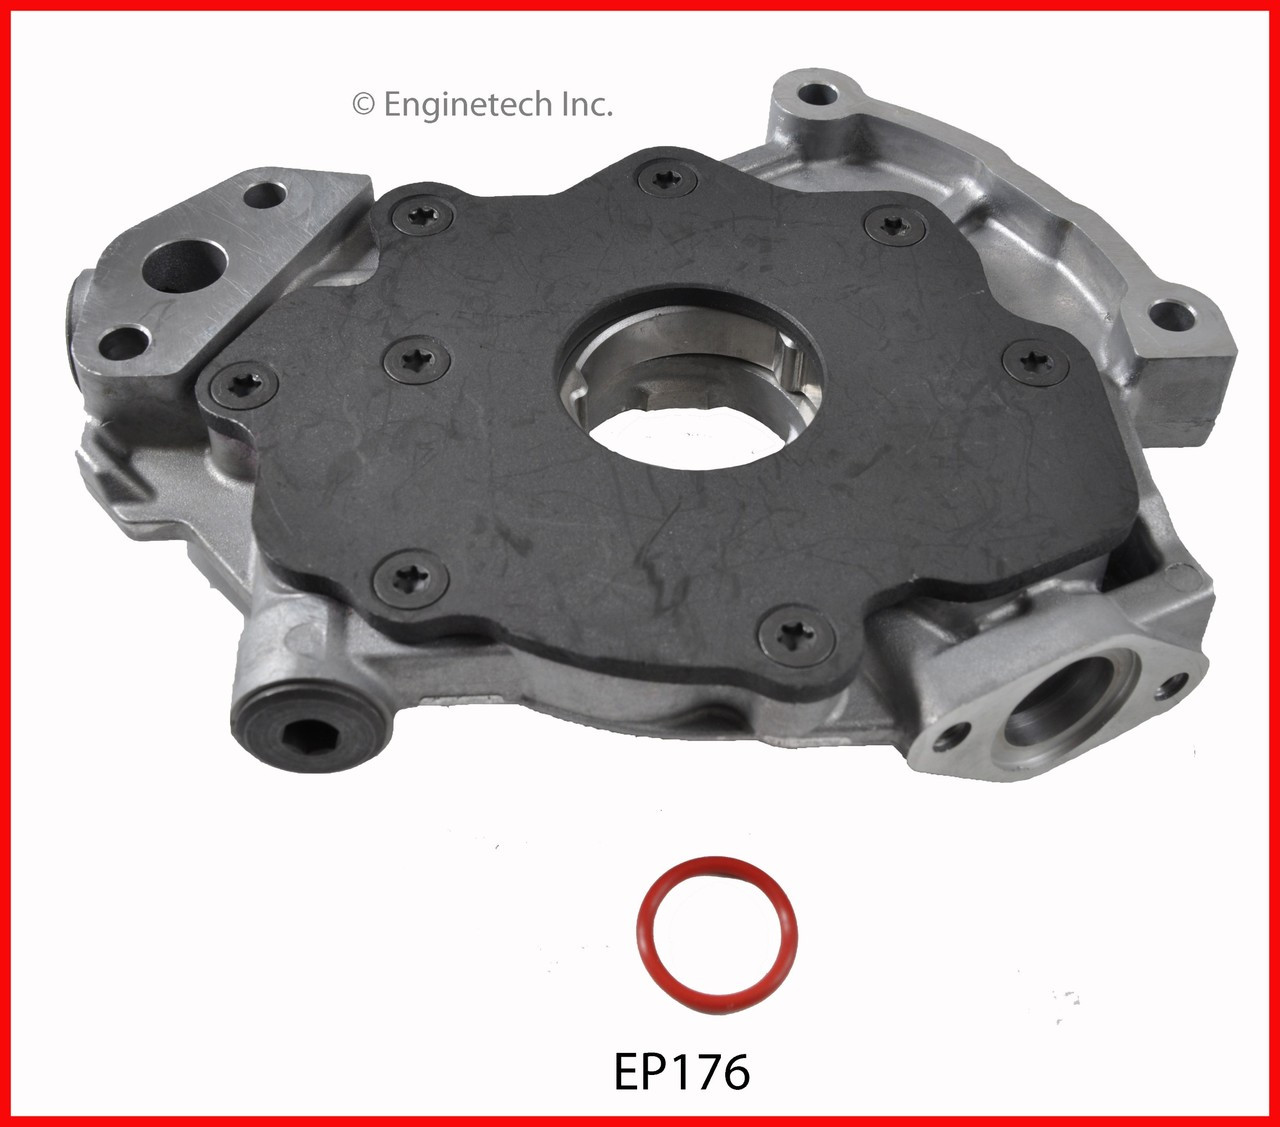 Oil Pump - 2000 Ford Expedition 5.4L (EP176.K122)